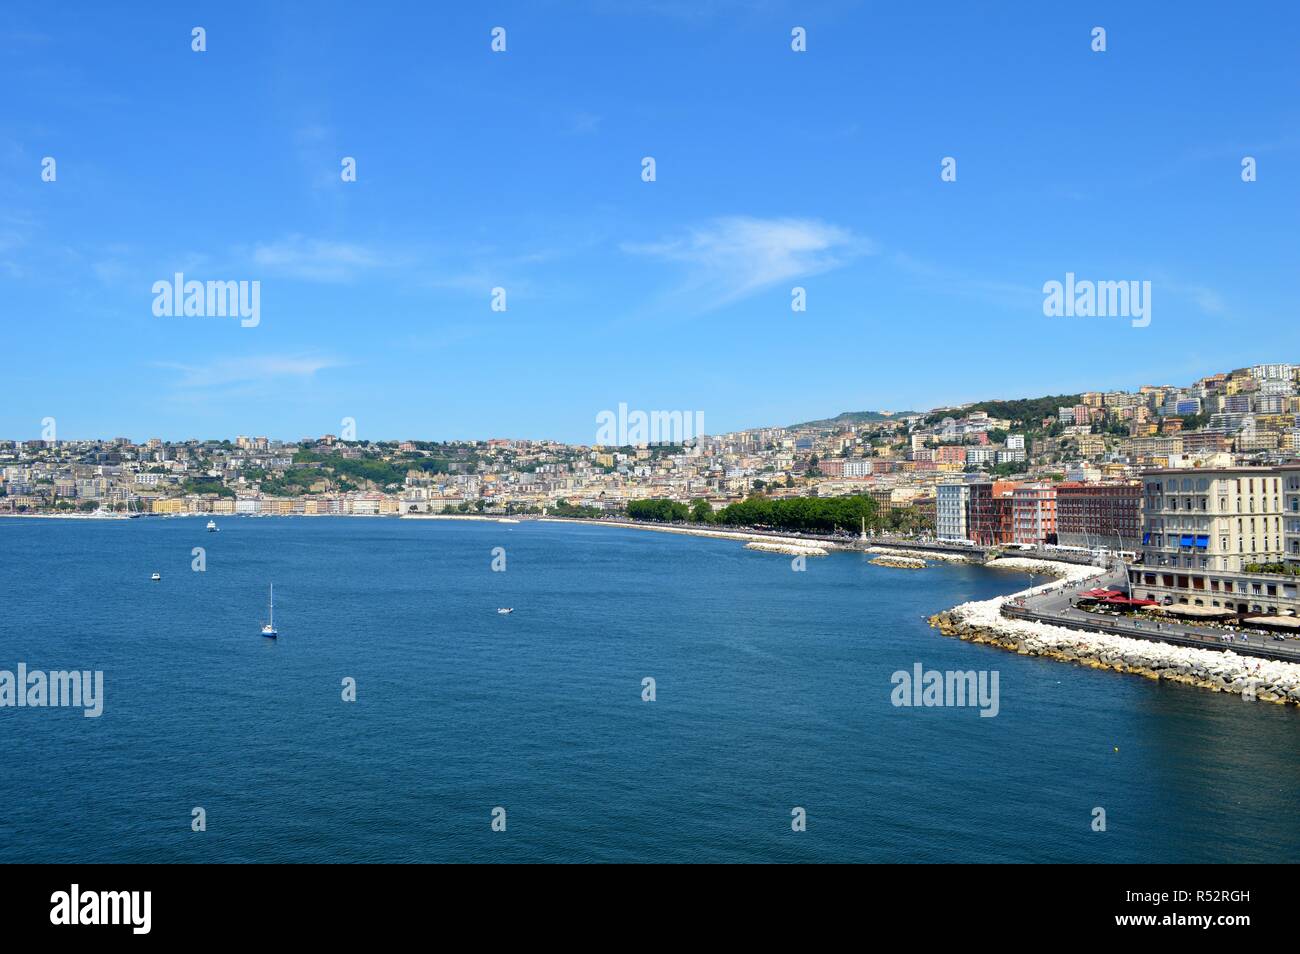 An image of a bright day on the city of Naples, in Italy, which brings out the beauty of the landscape Stock Photo